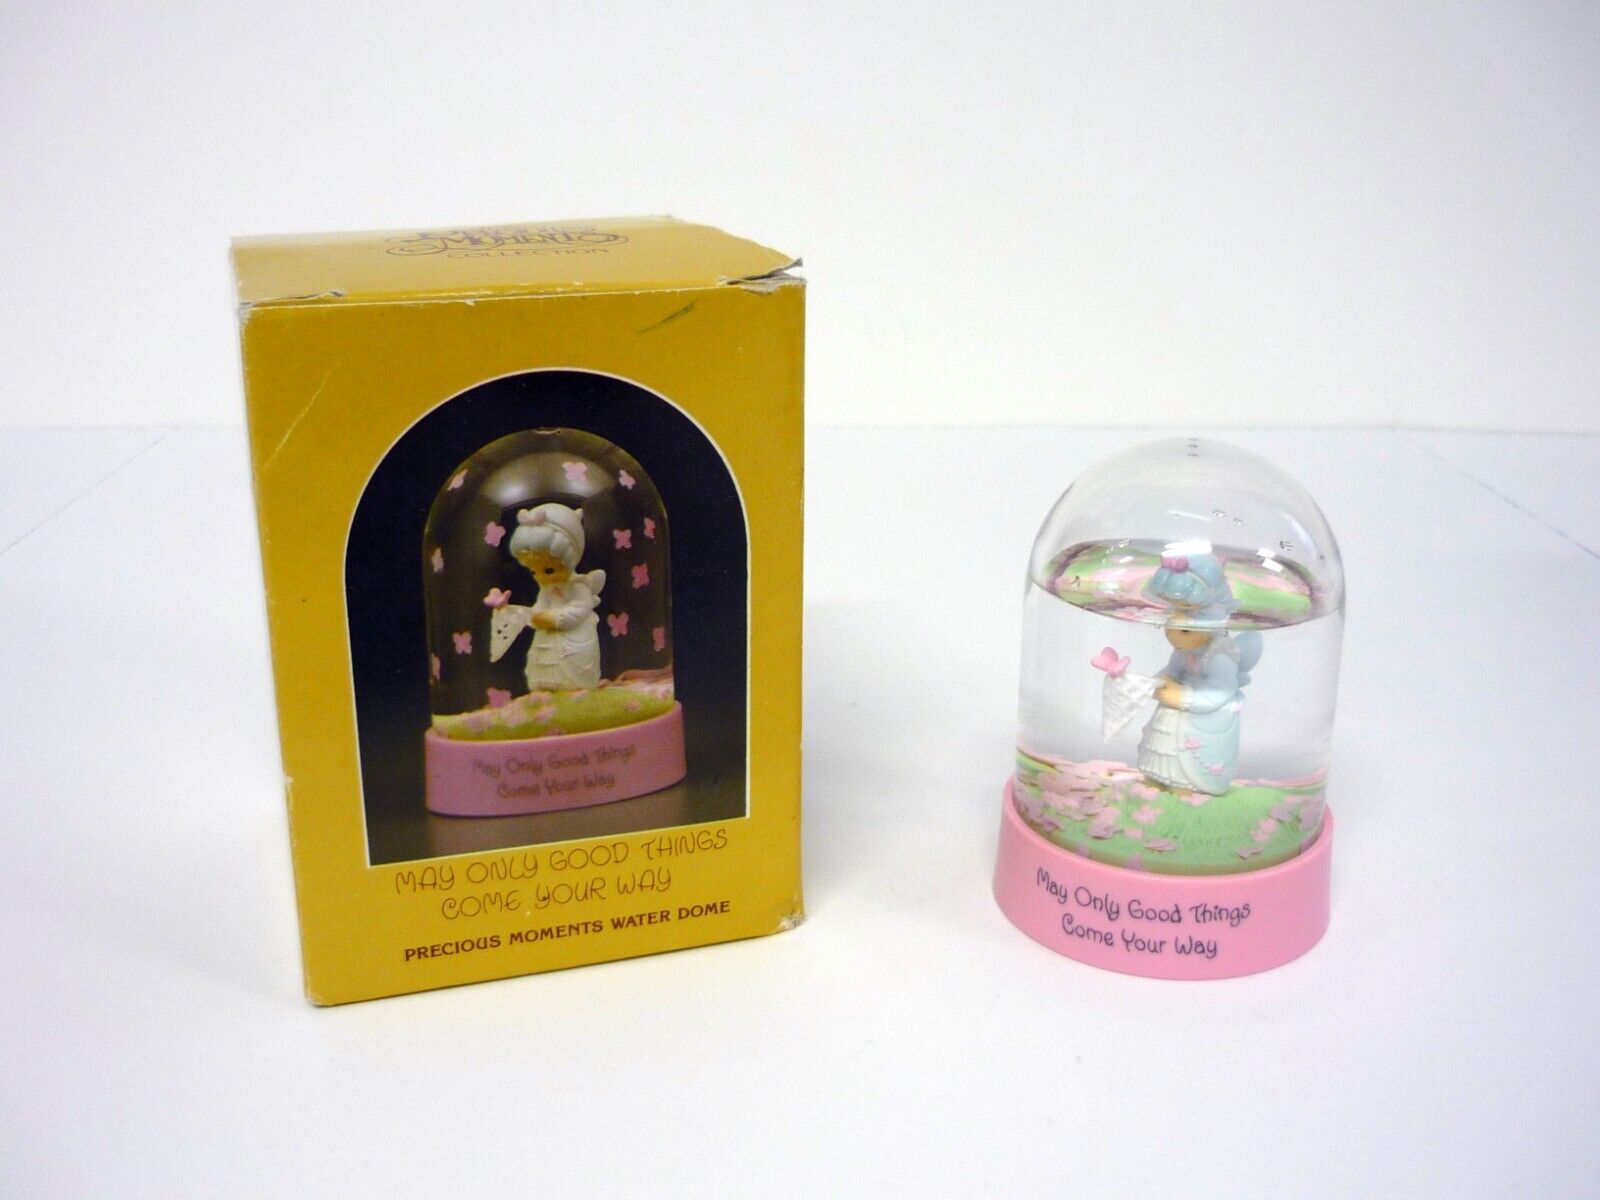 Primary image for Precious Moments Water Dome Enesco May Only Good Things Come Your Way w/Box 1986